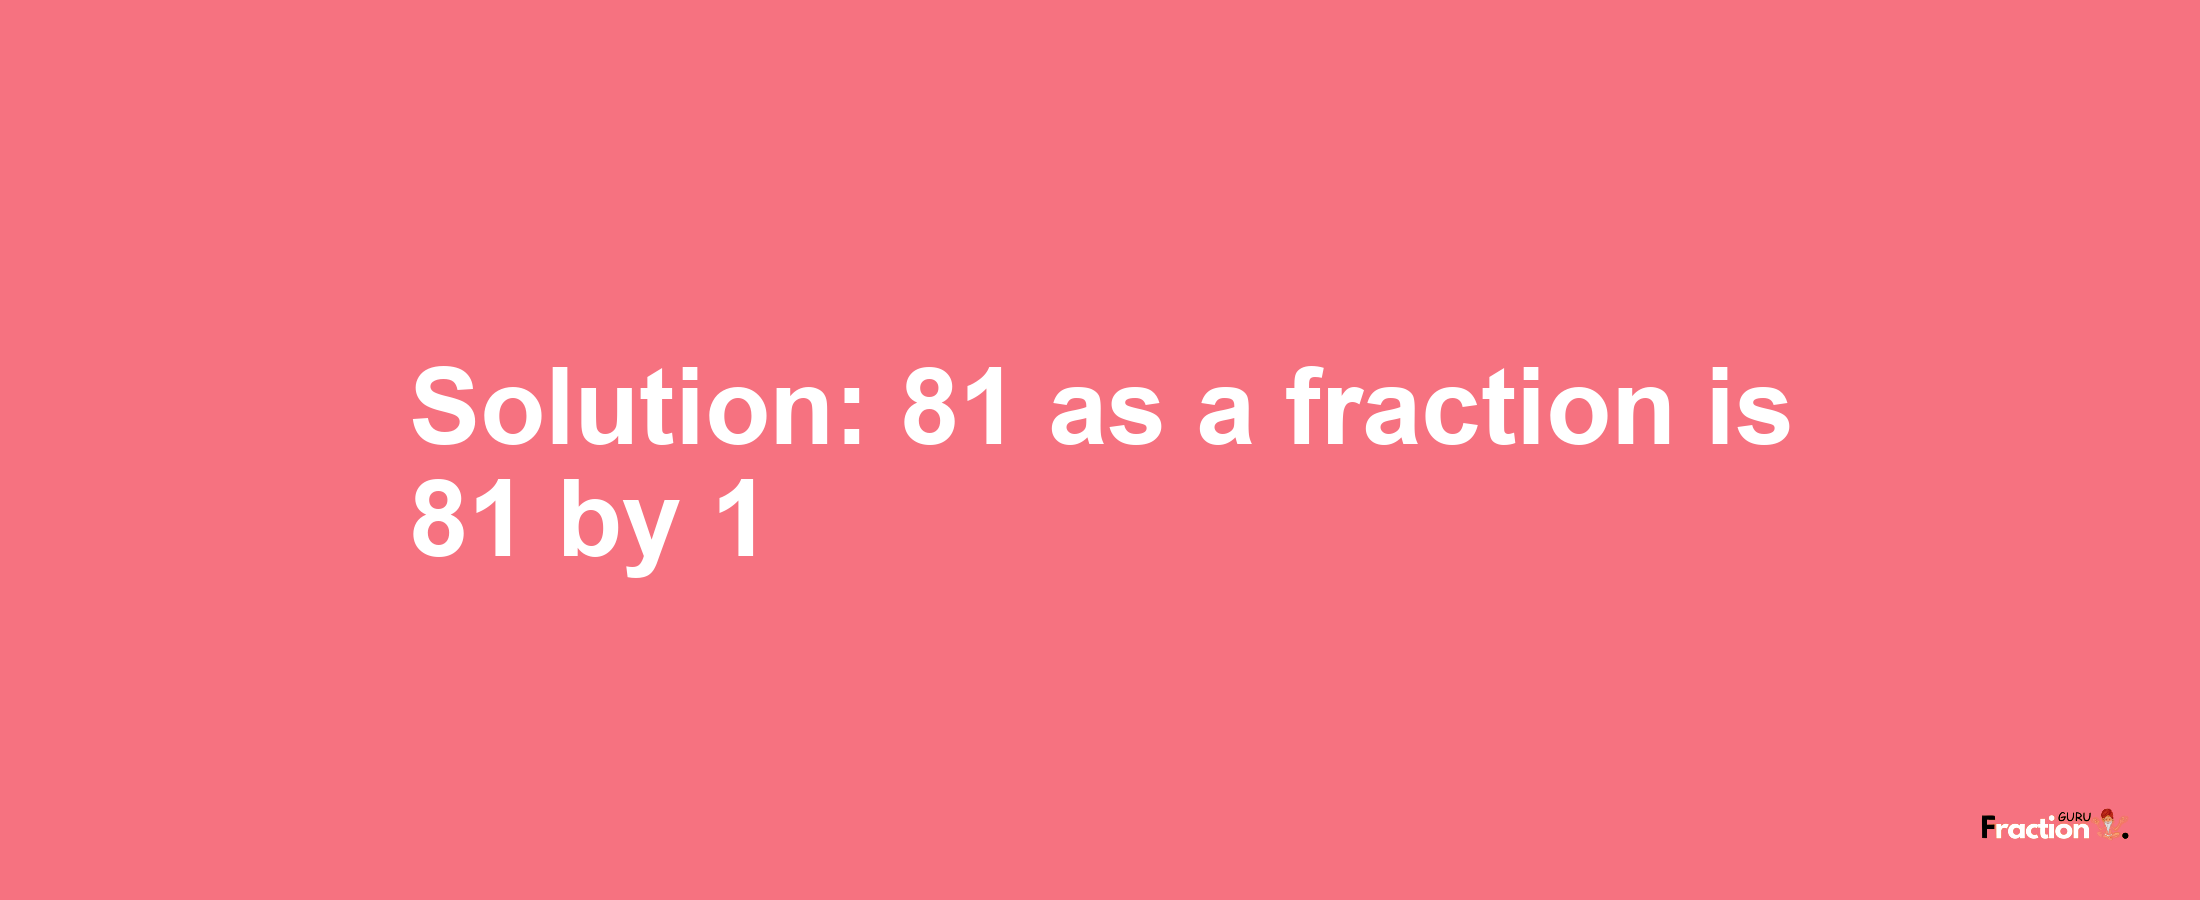 Solution:81 as a fraction is 81/1